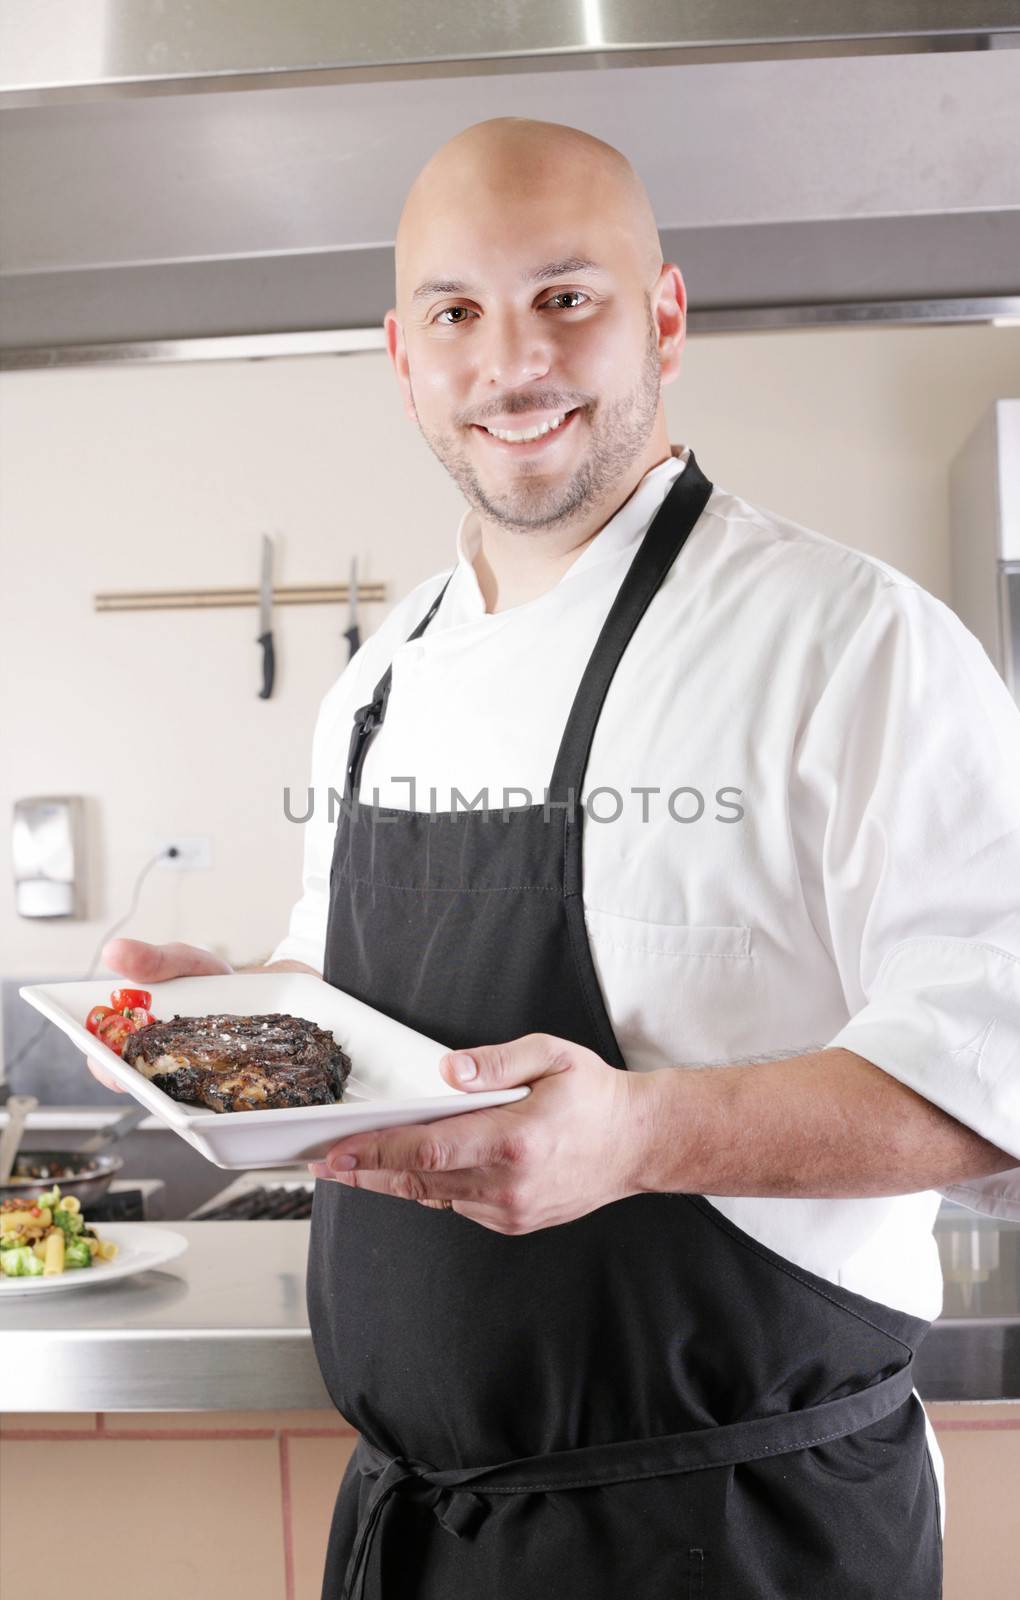 Chef presenting a juicy steak in the kitchen